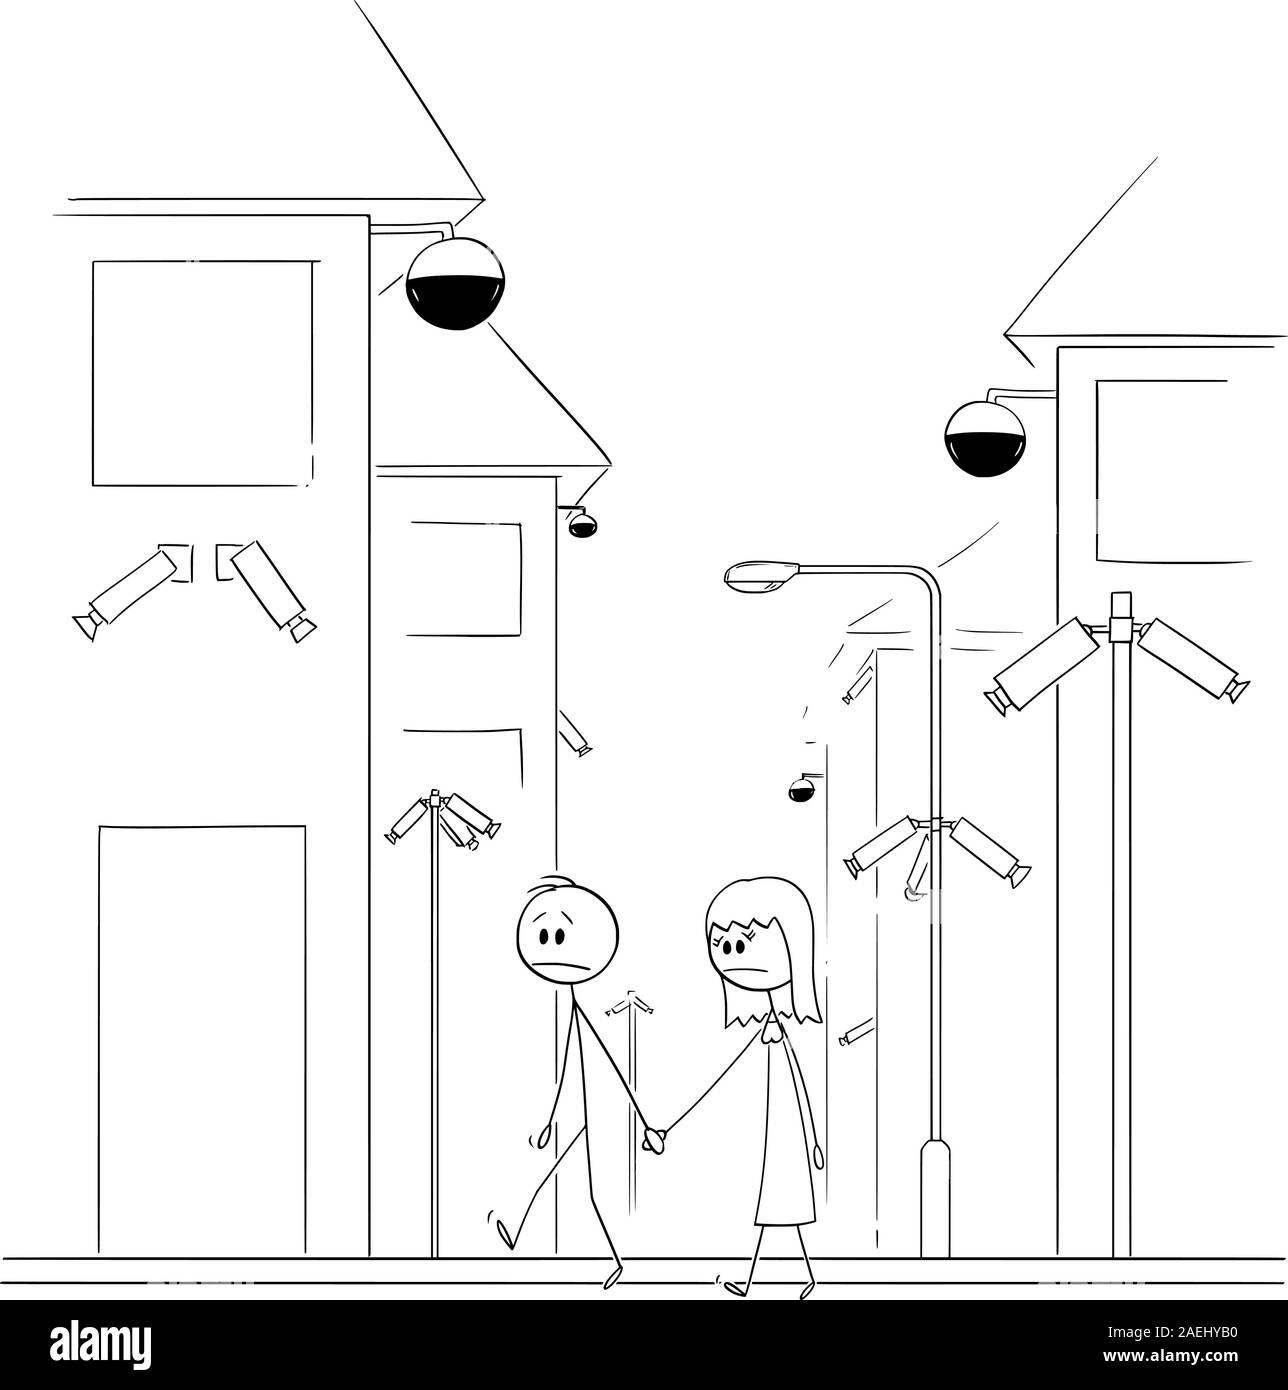 Vector cartoon stick figure drawing conceptual illustration of man and woman walking on the street with surveillance security cameras everywhere. Concept of living in unfreedom society or dictatorship. Stock Vector